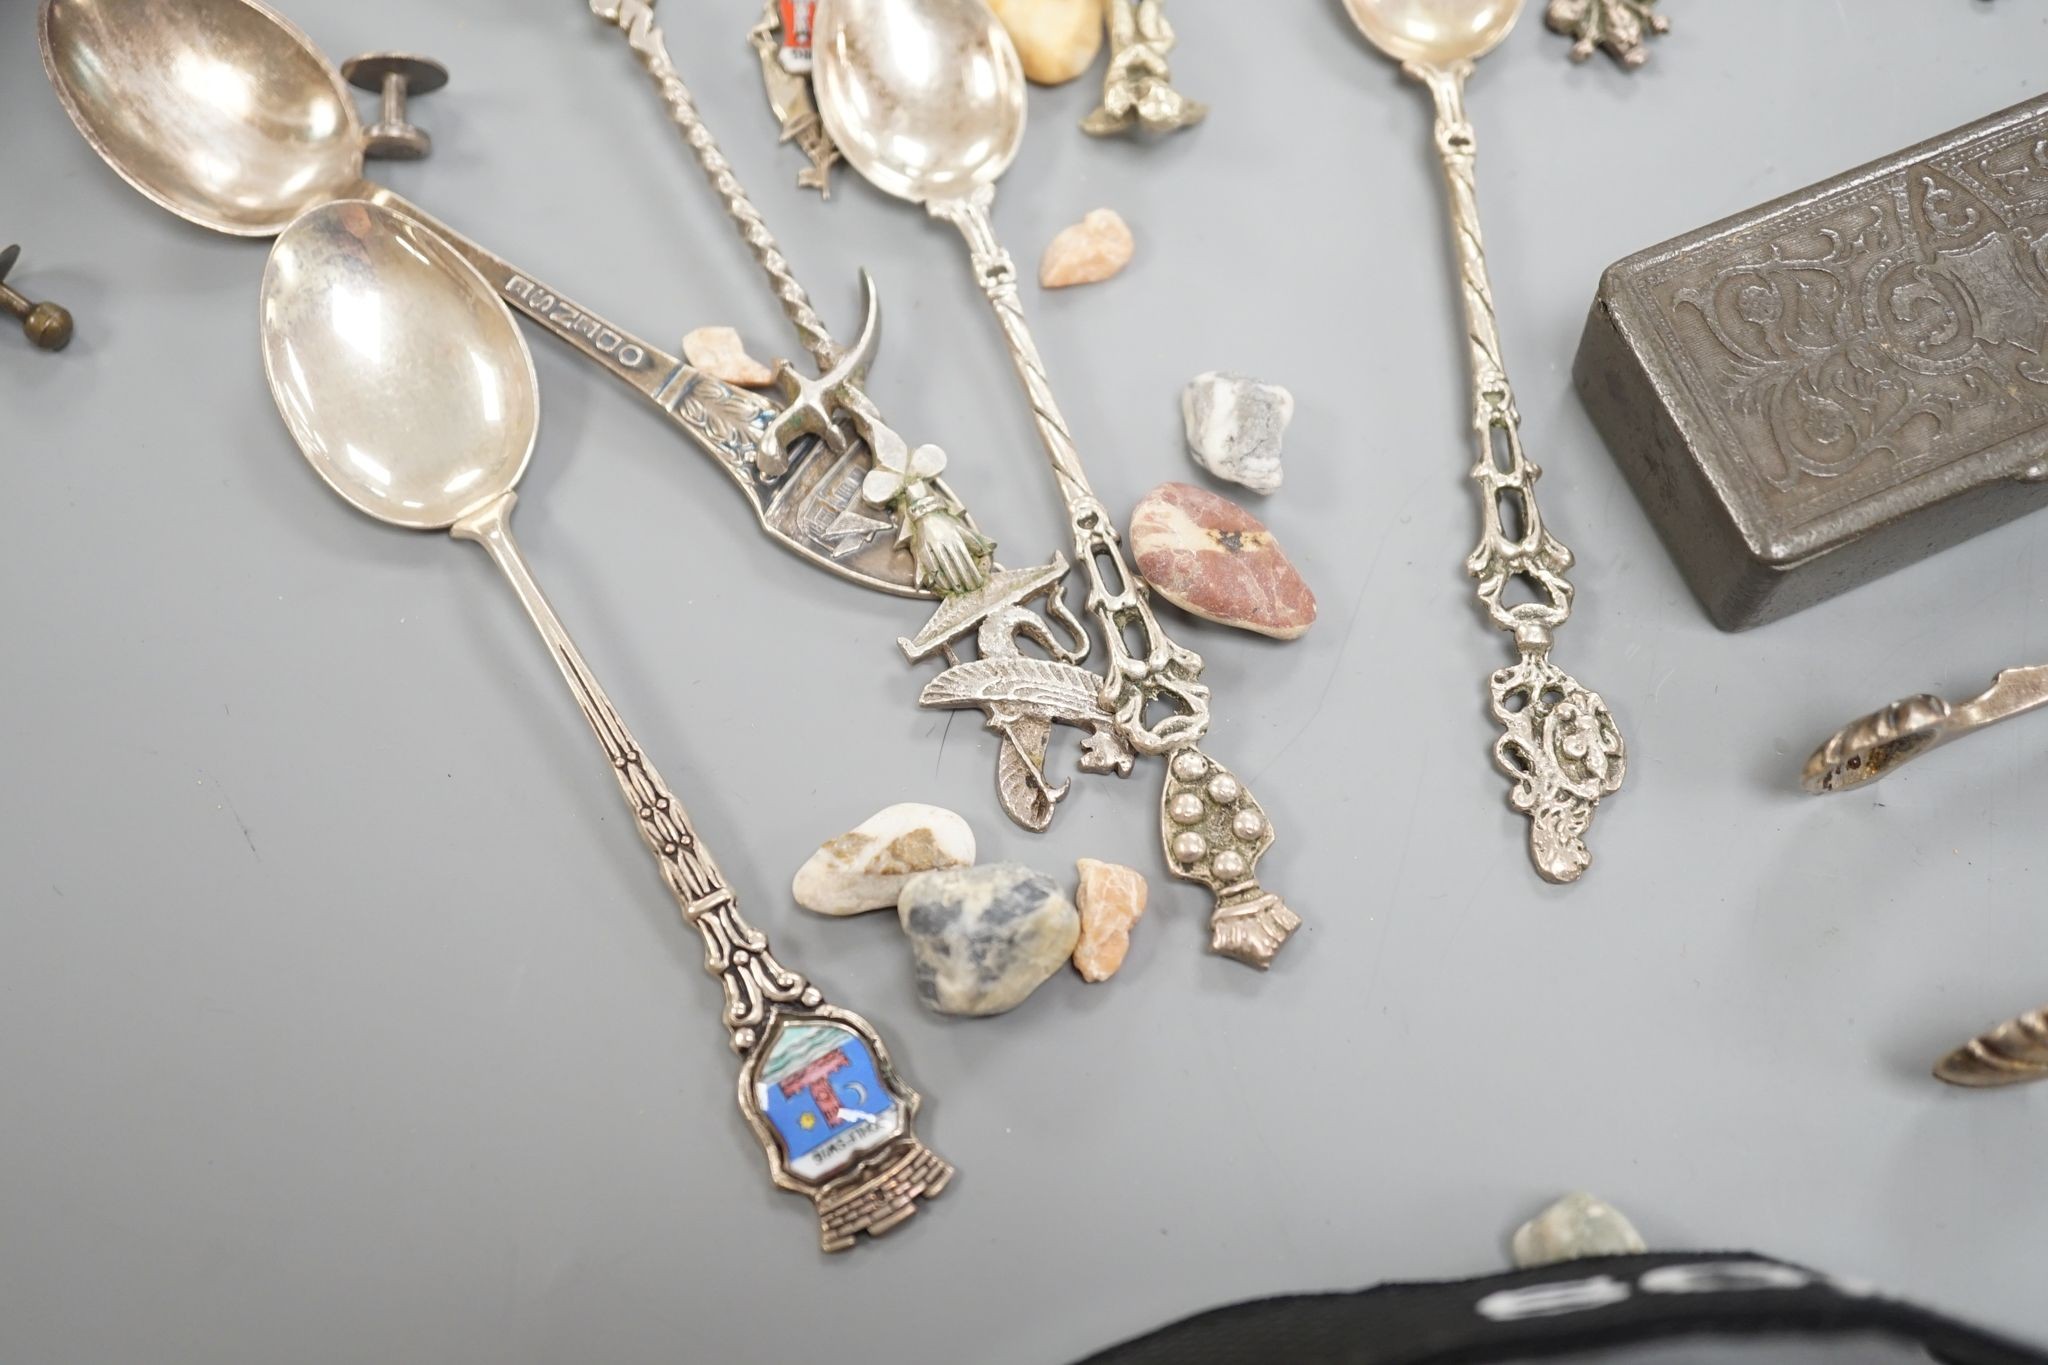 A Georg Jensen & Wendel A/S sterling small spoon, 10.2cm, a pair of antique silver sugar tongs(a.f.), a metal snuff box and a small group of minor spoons including continental white metal.